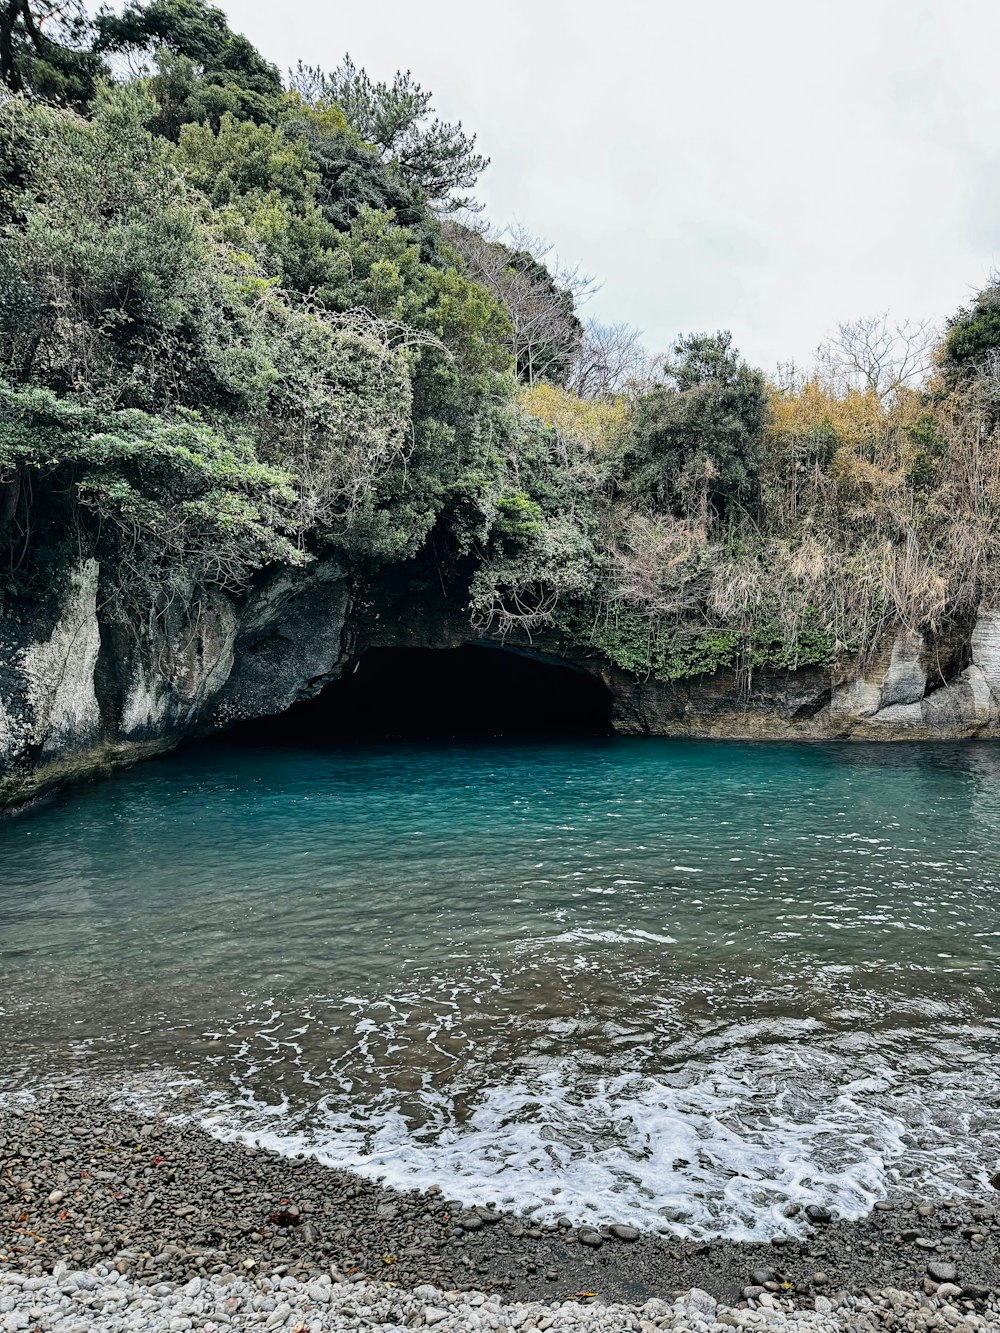 a body of water with a cave in the middle of it